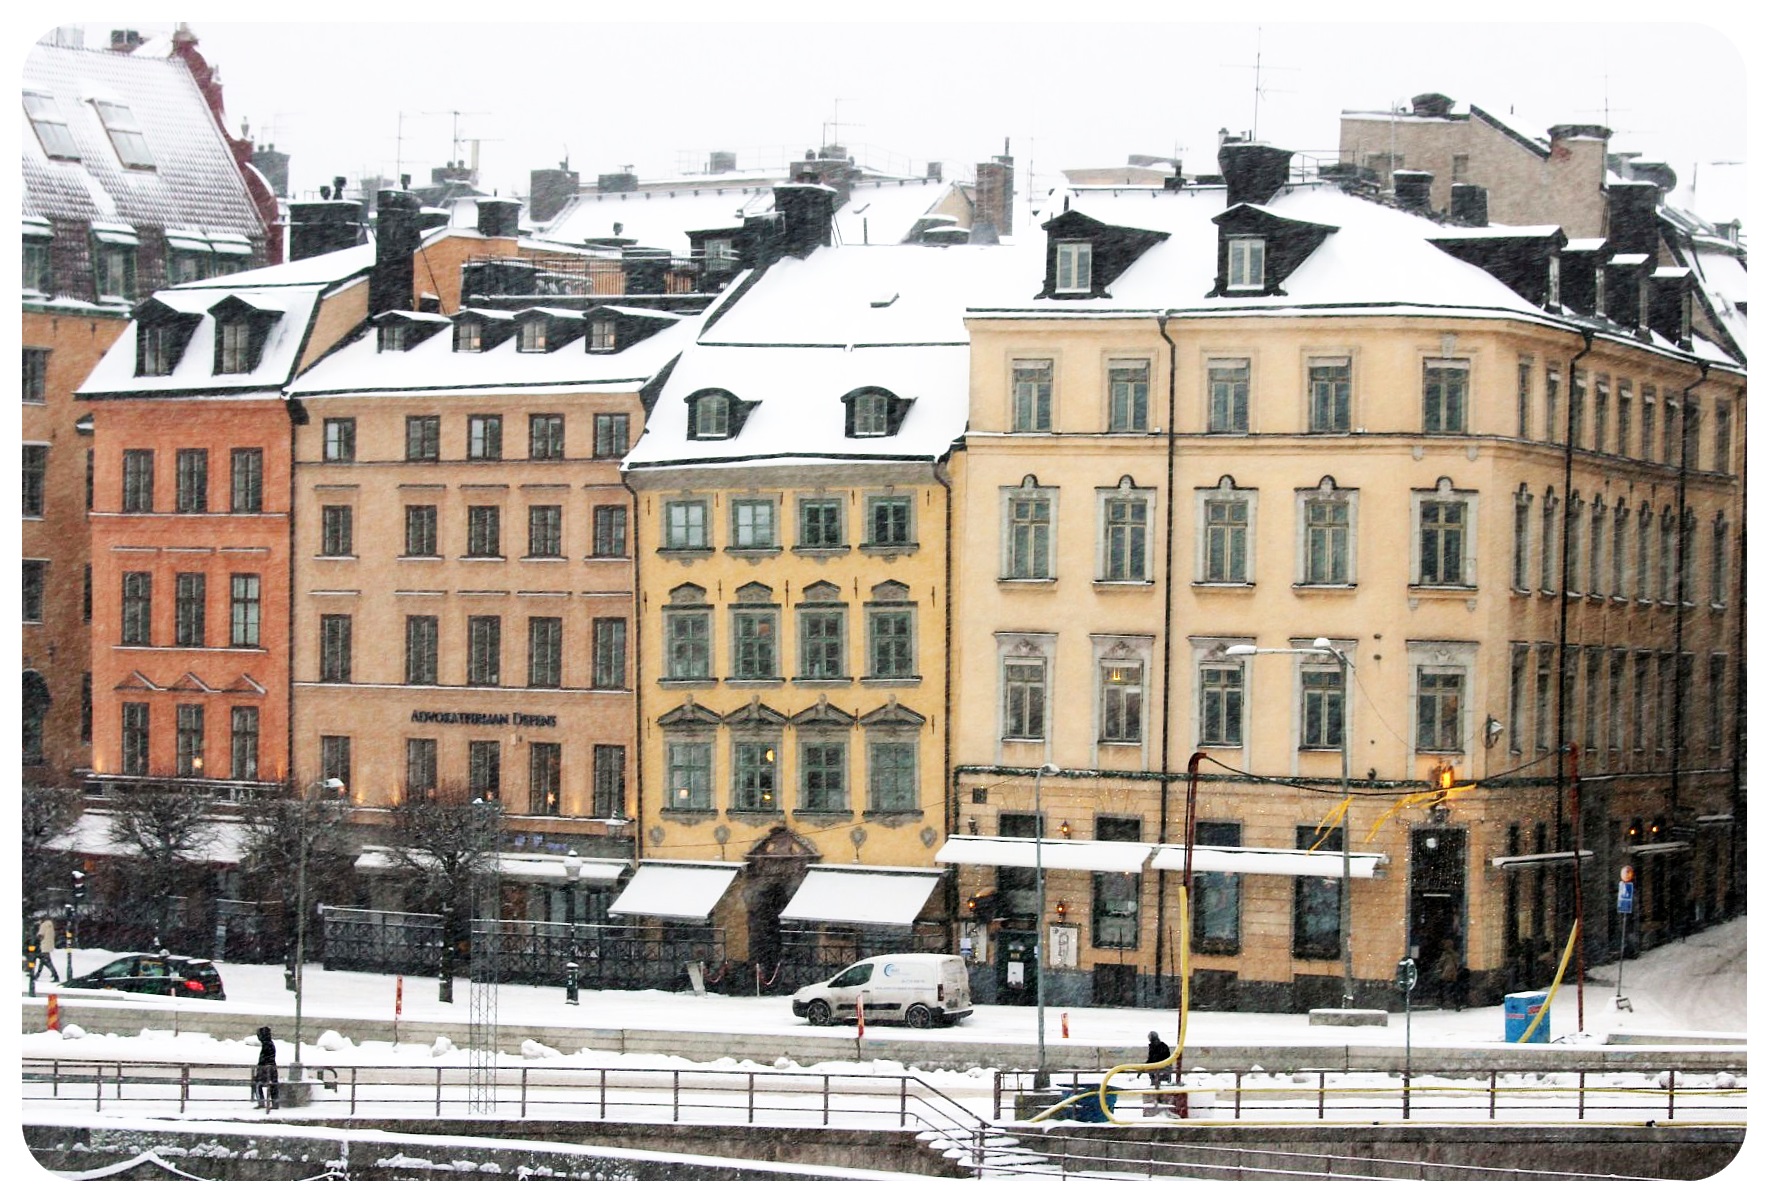 10 things that surprised me about Stockholm